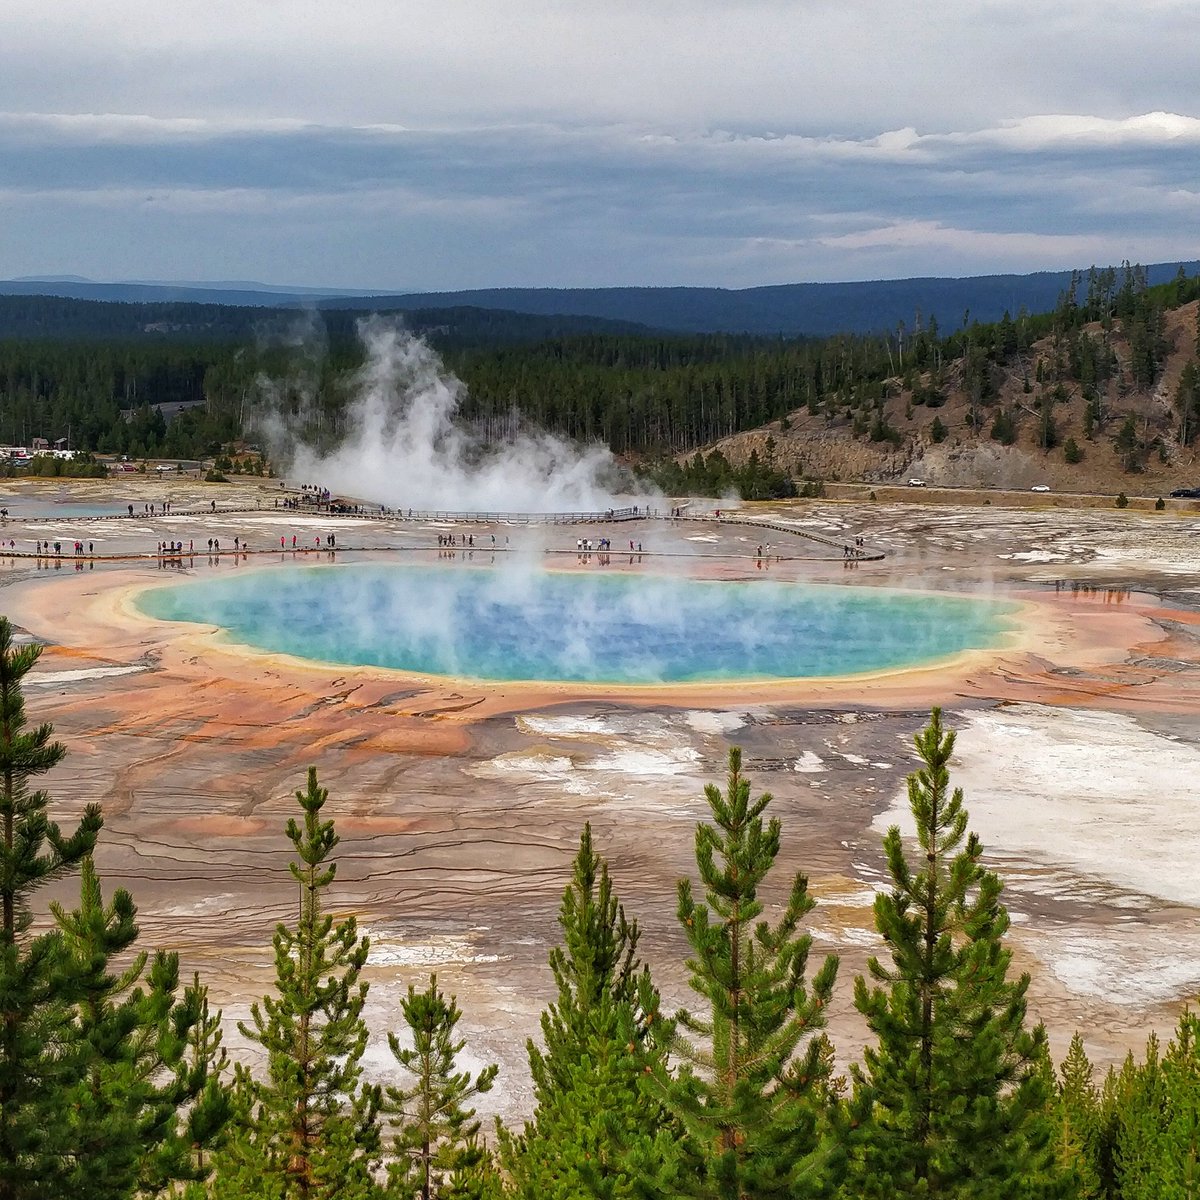 Grand Prismatic Spring in Yellowstone National Park. #Yellowstone #visitYellowstone #GrandPrismaticSpring #roadTrip